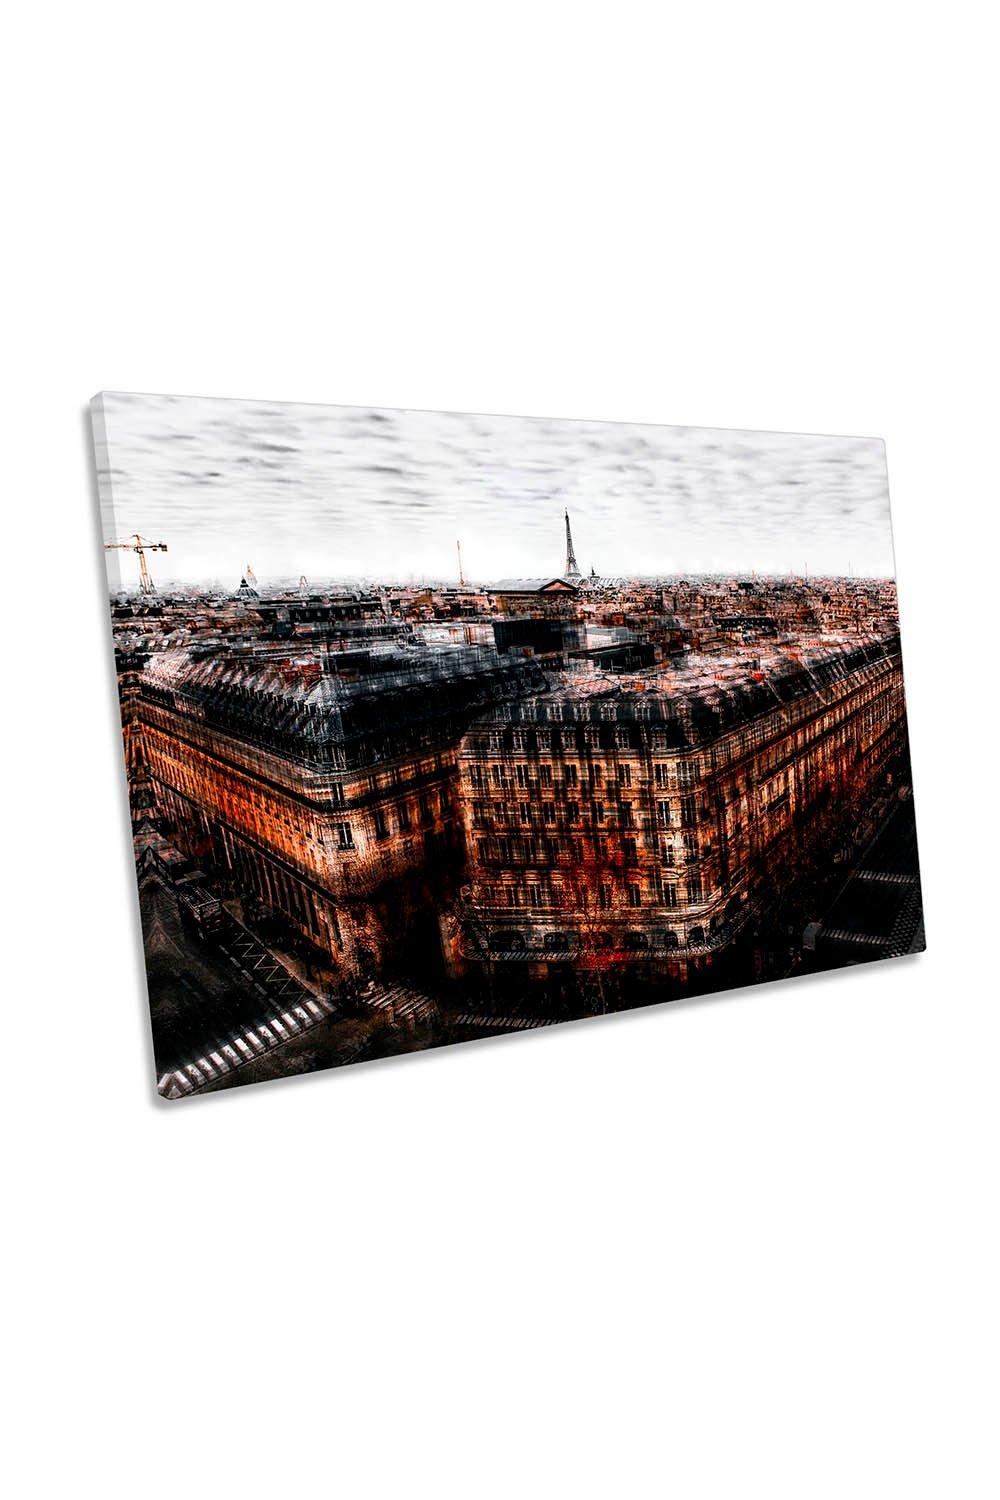 On the Roofs of Paris City Abstract Canvas Wall Art Picture Print